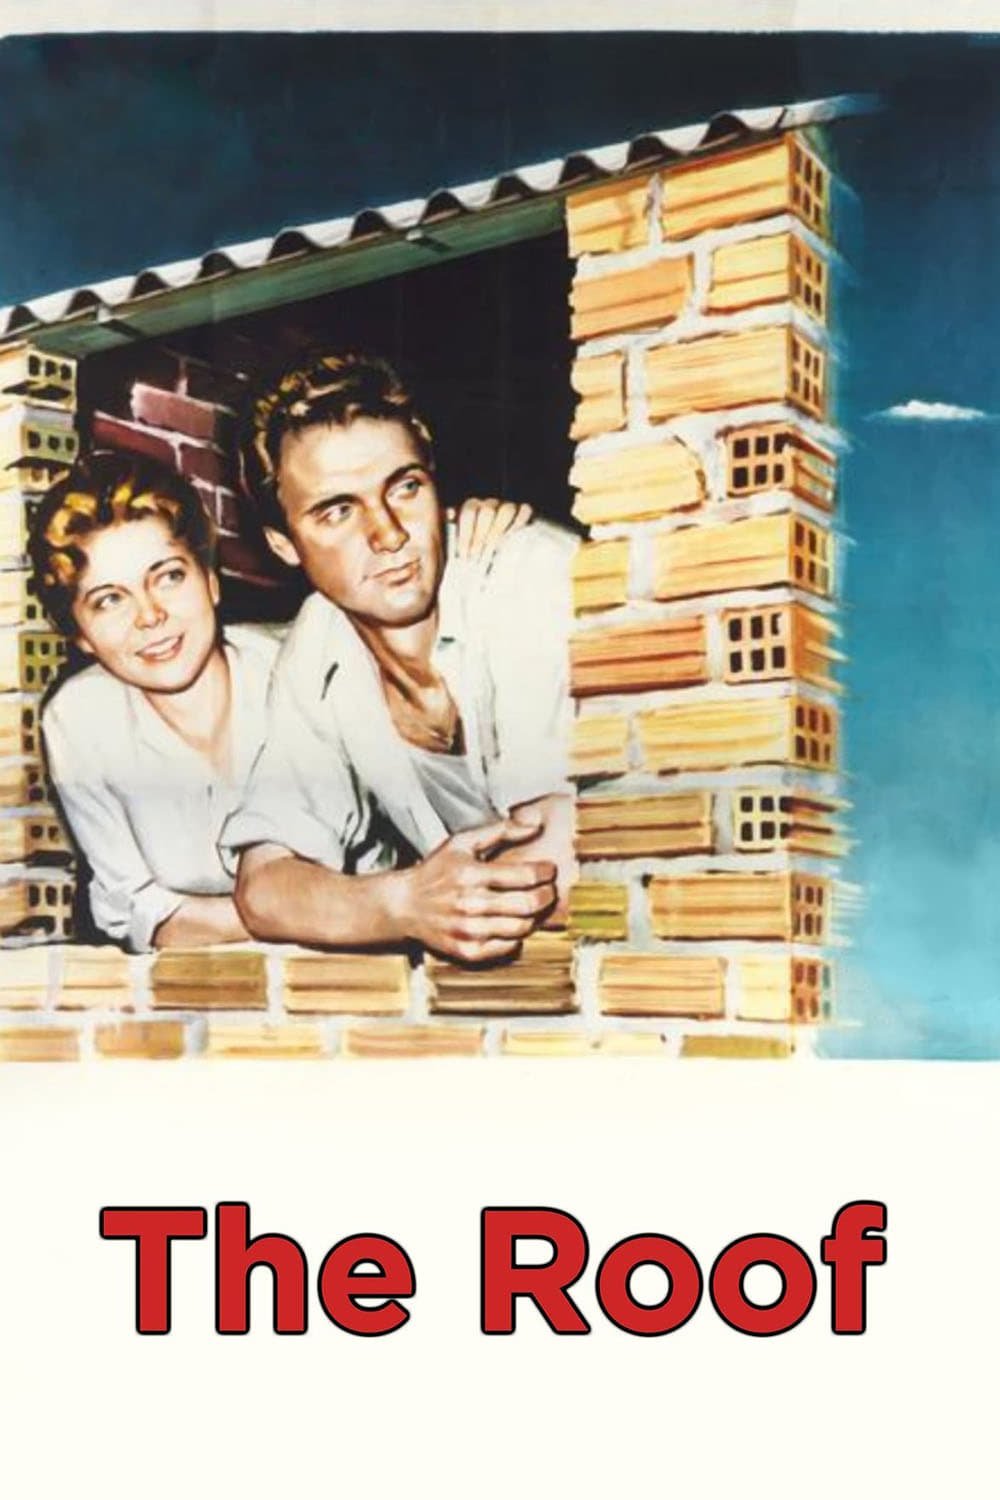 The Roof (1956)